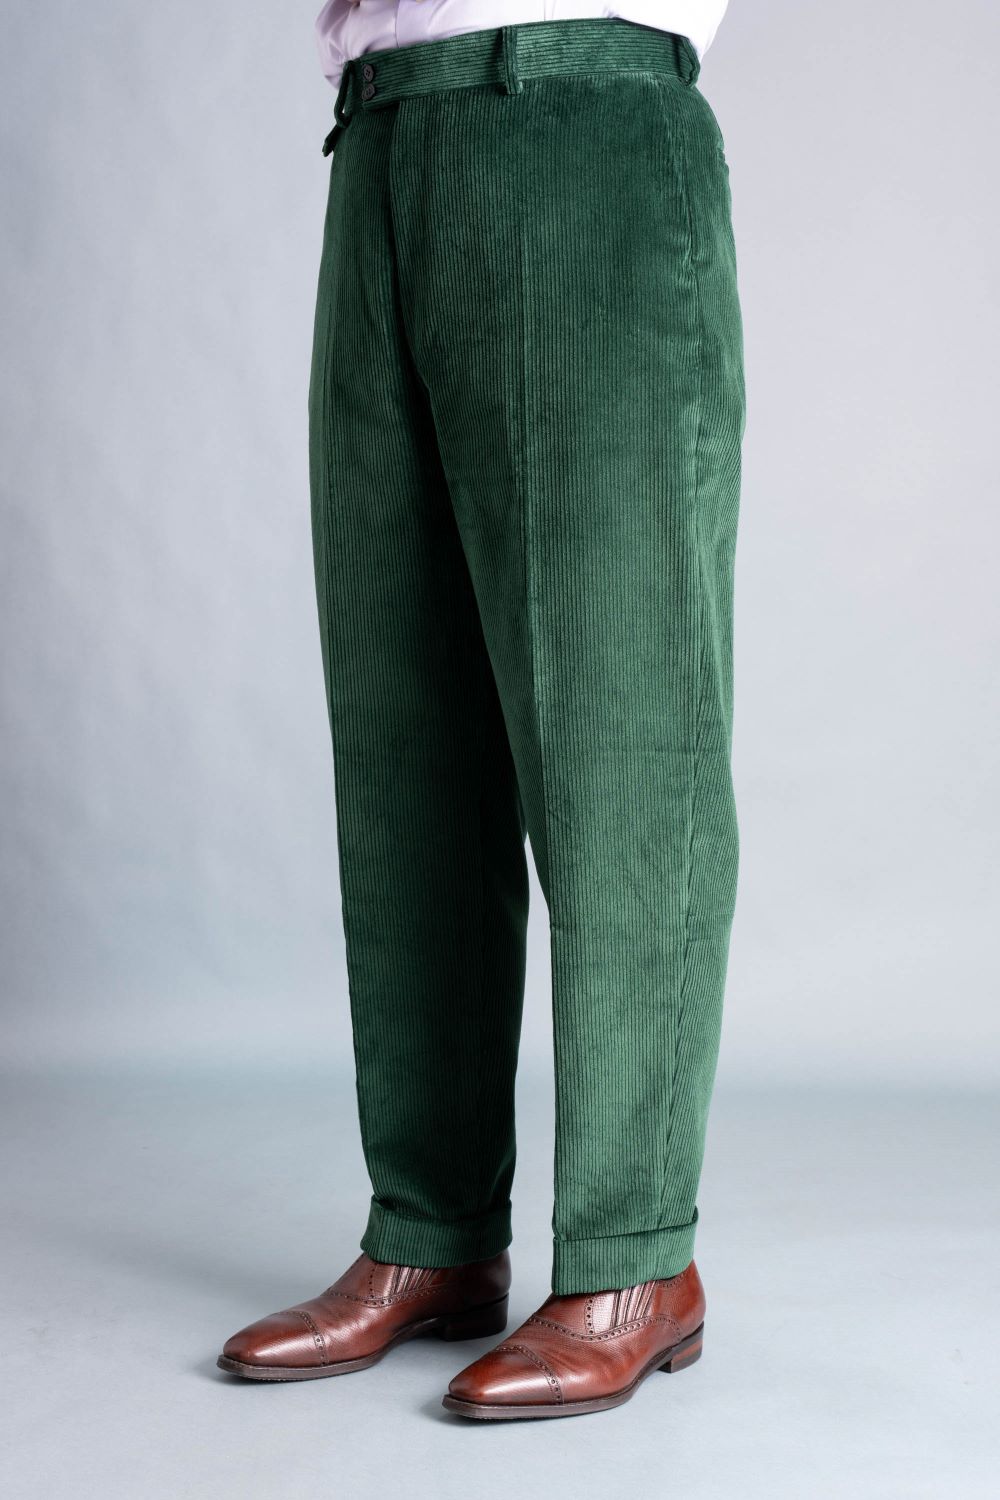 Stancliffe Corduroy Flat Front Trouser in British Racing Green gray background